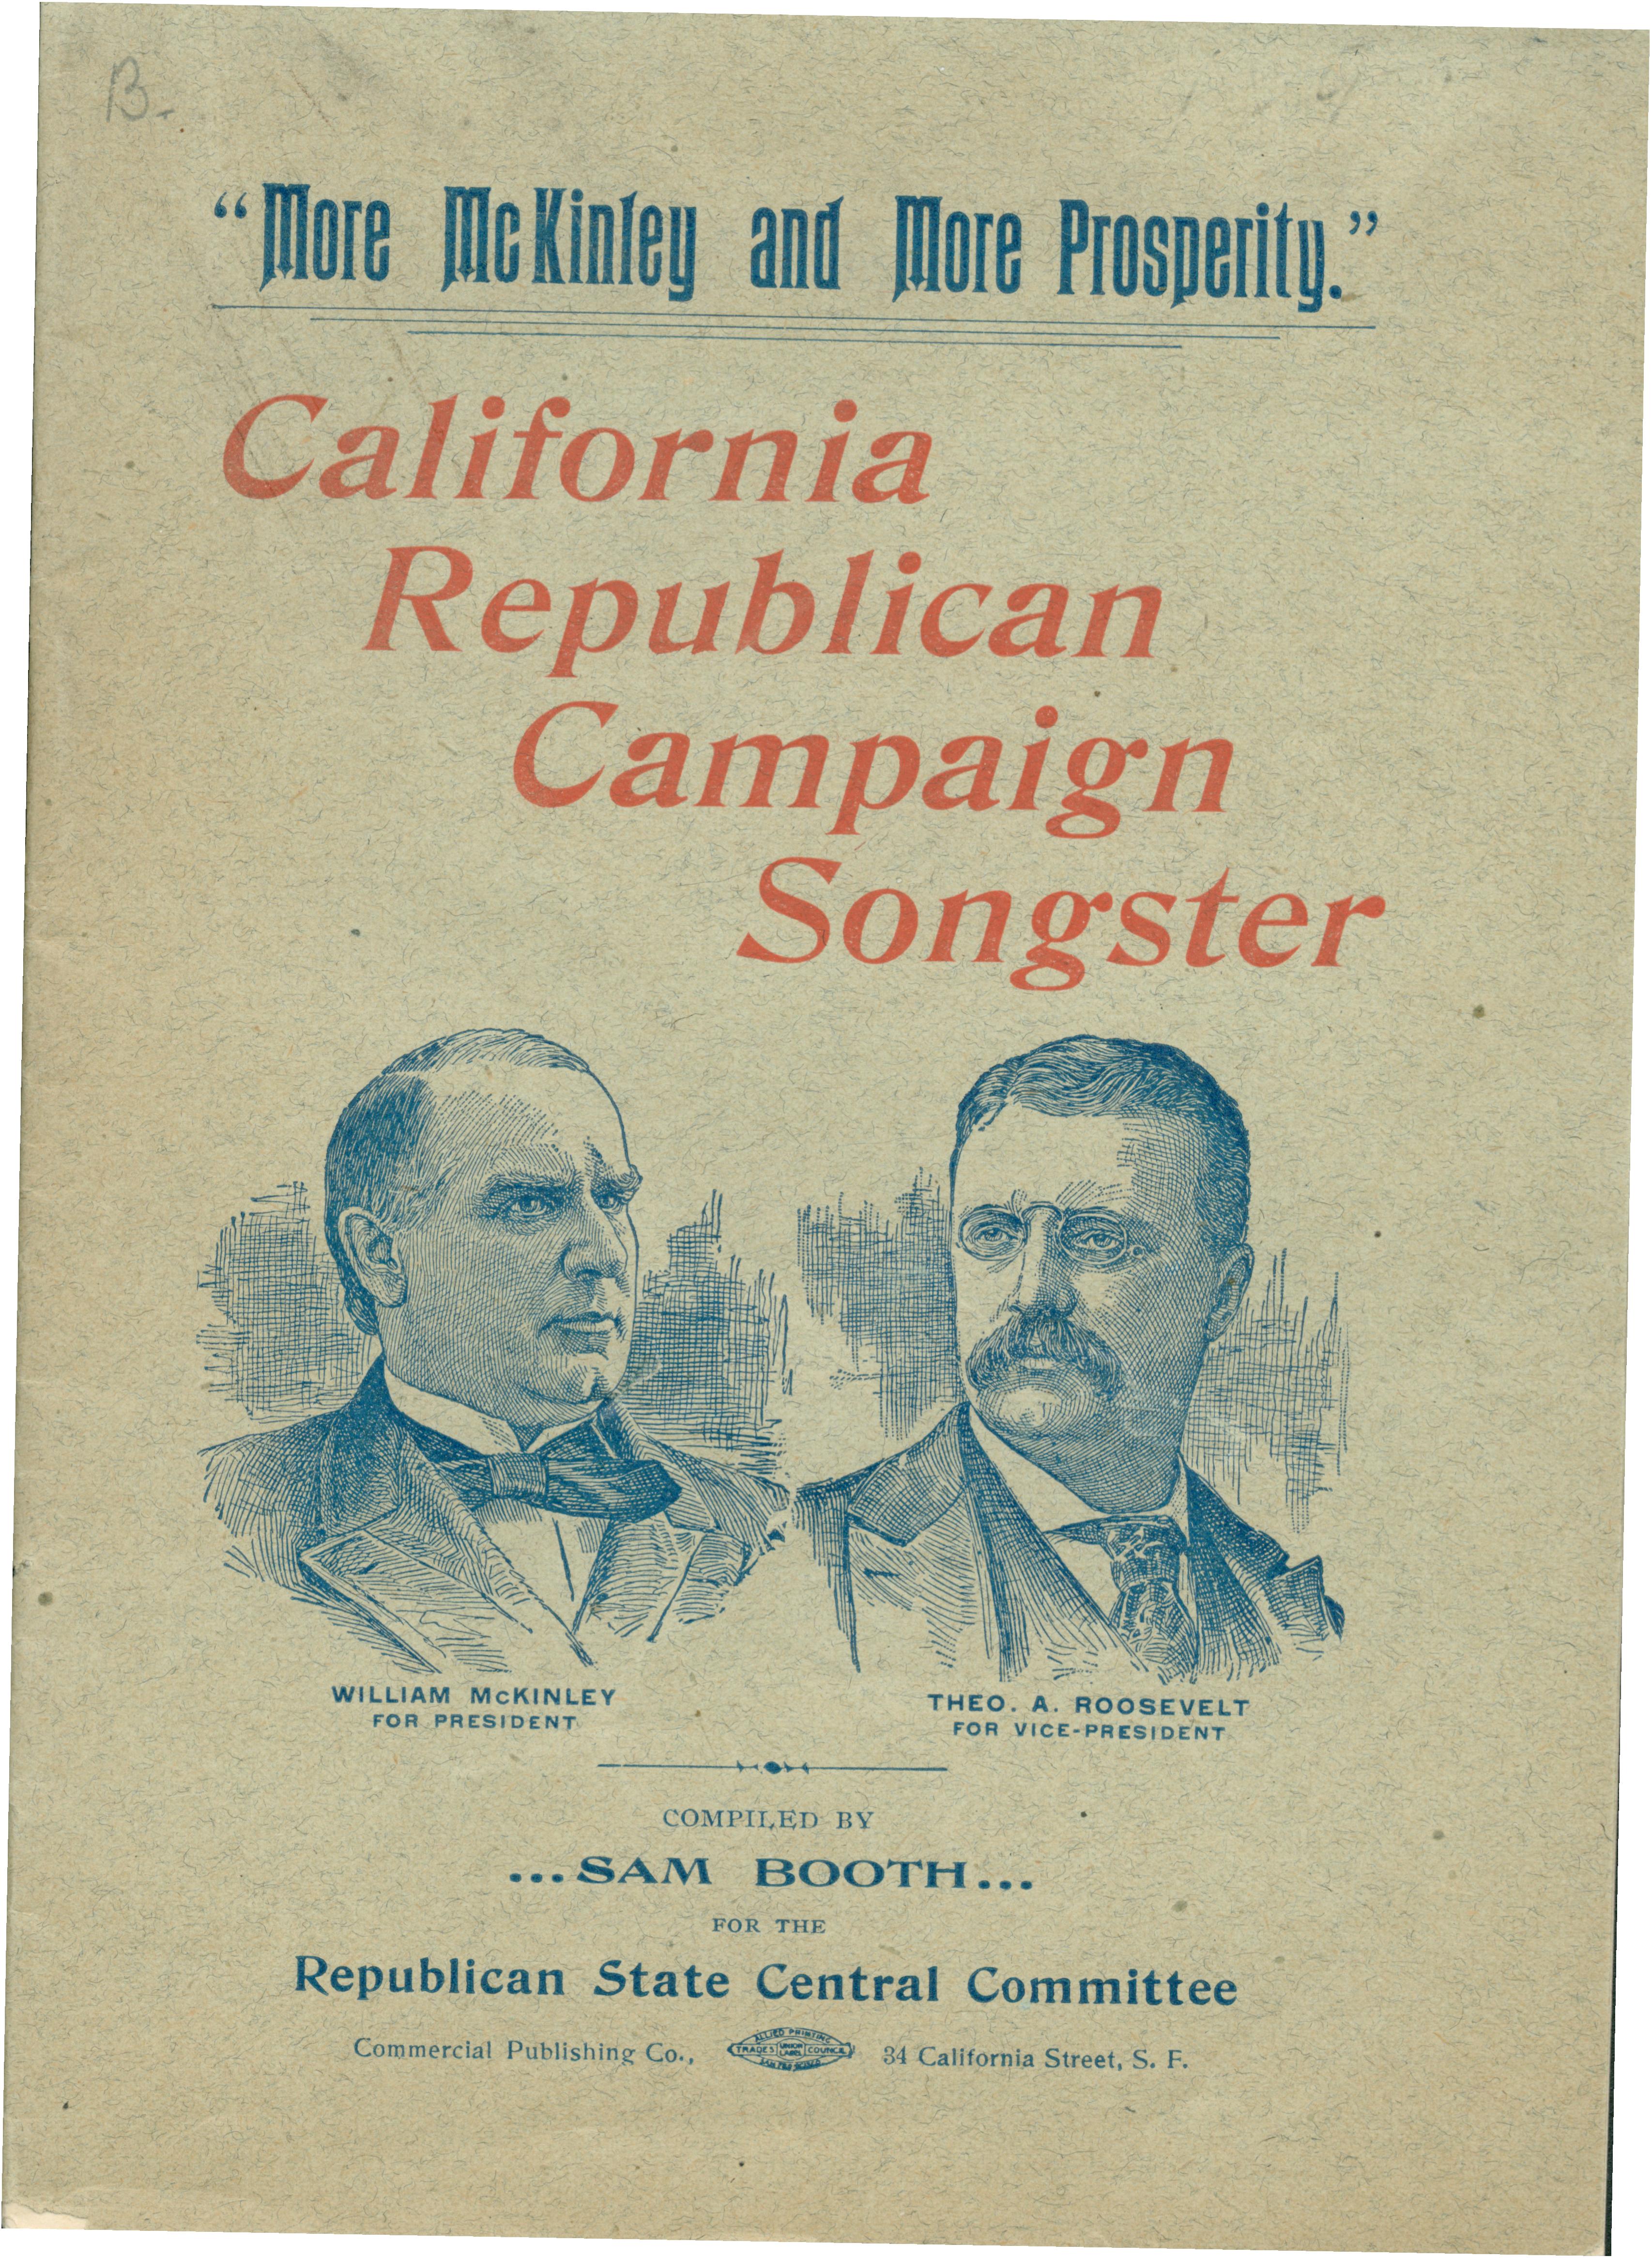 The cover of this book trumpets the campaign slogan 'More McKinley and More Prosperity above the title, below the title are portraits of the presidential and vice-presidential candidates, McKinley and Roosevelt.